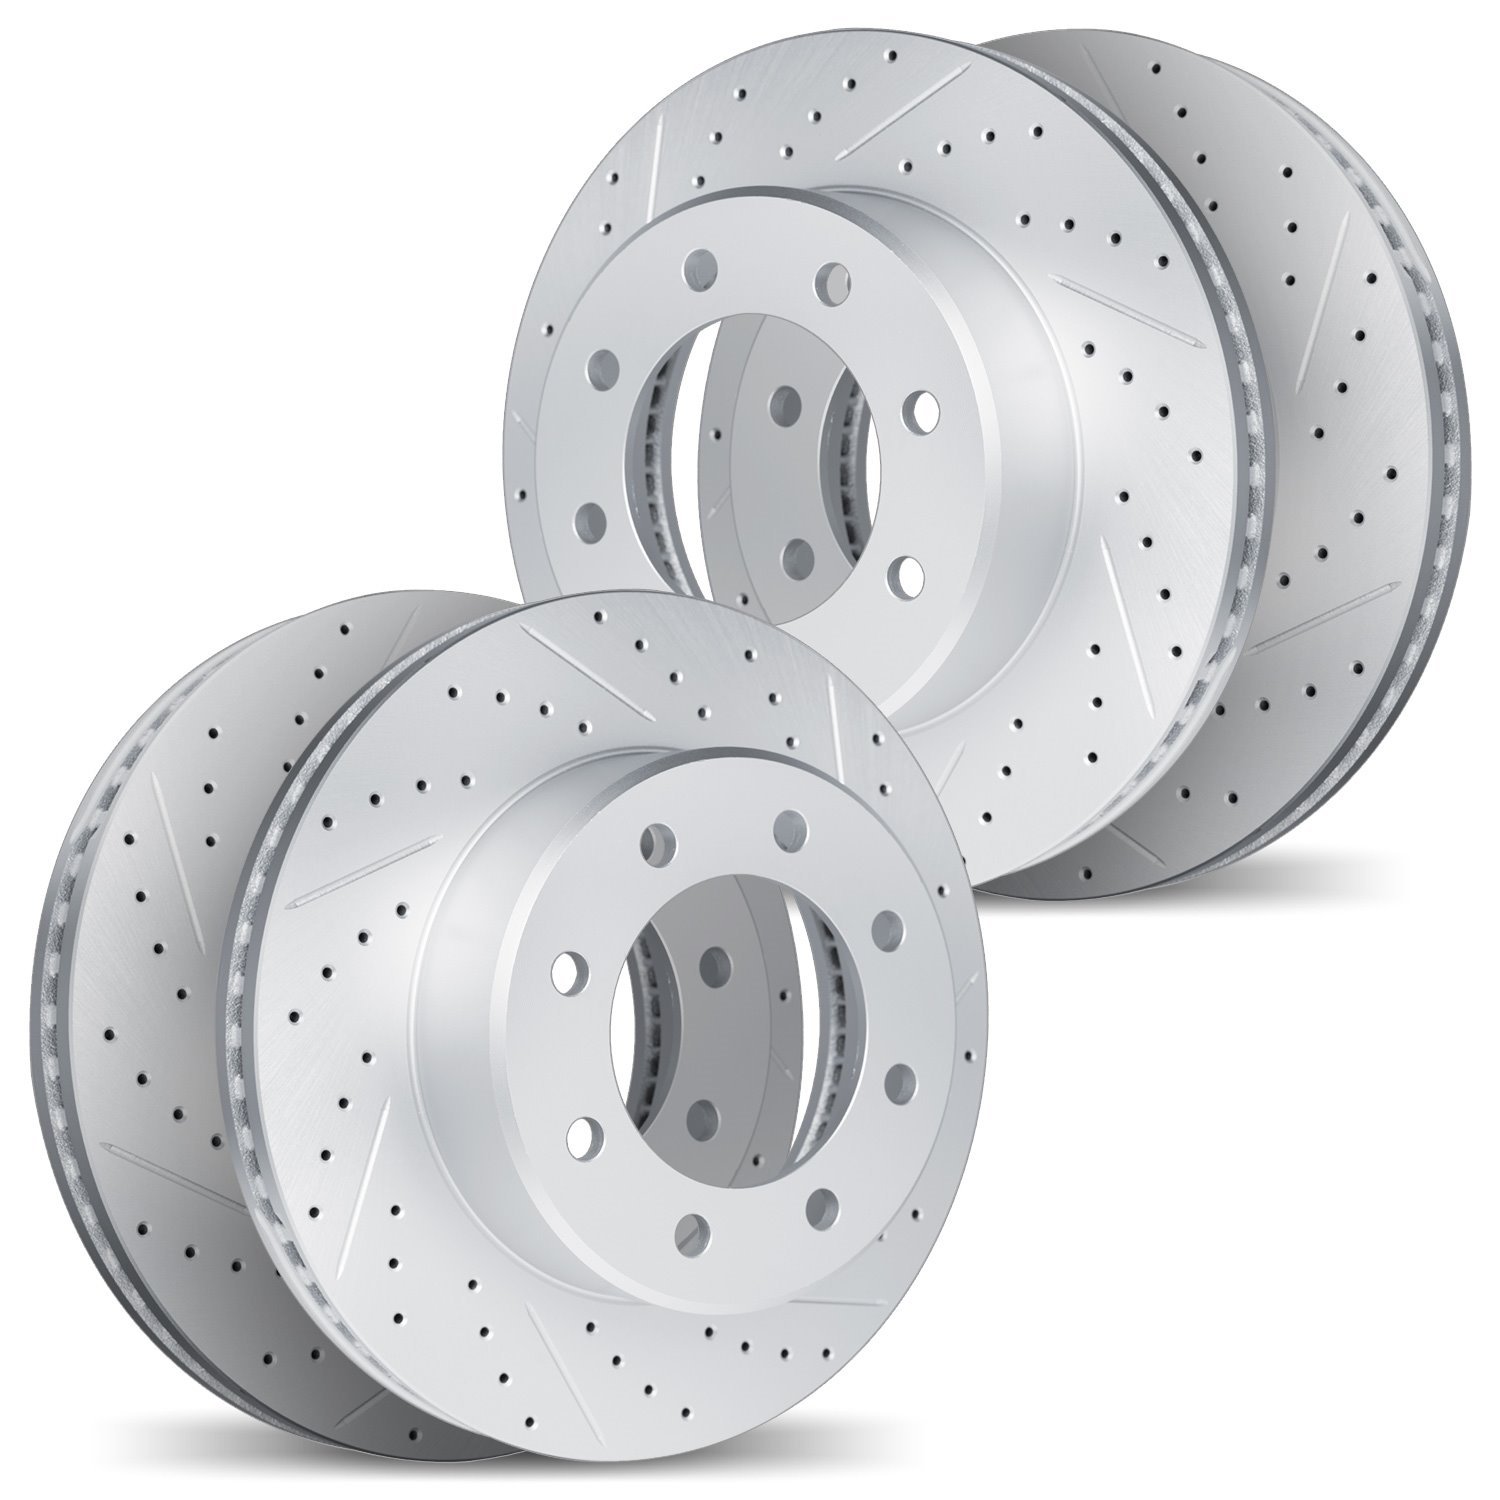 2004-54111 Geoperformance Drilled/Slotted Brake Rotors, 2005-2012 Ford/Lincoln/Mercury/Mazda, Position: Front and Rear